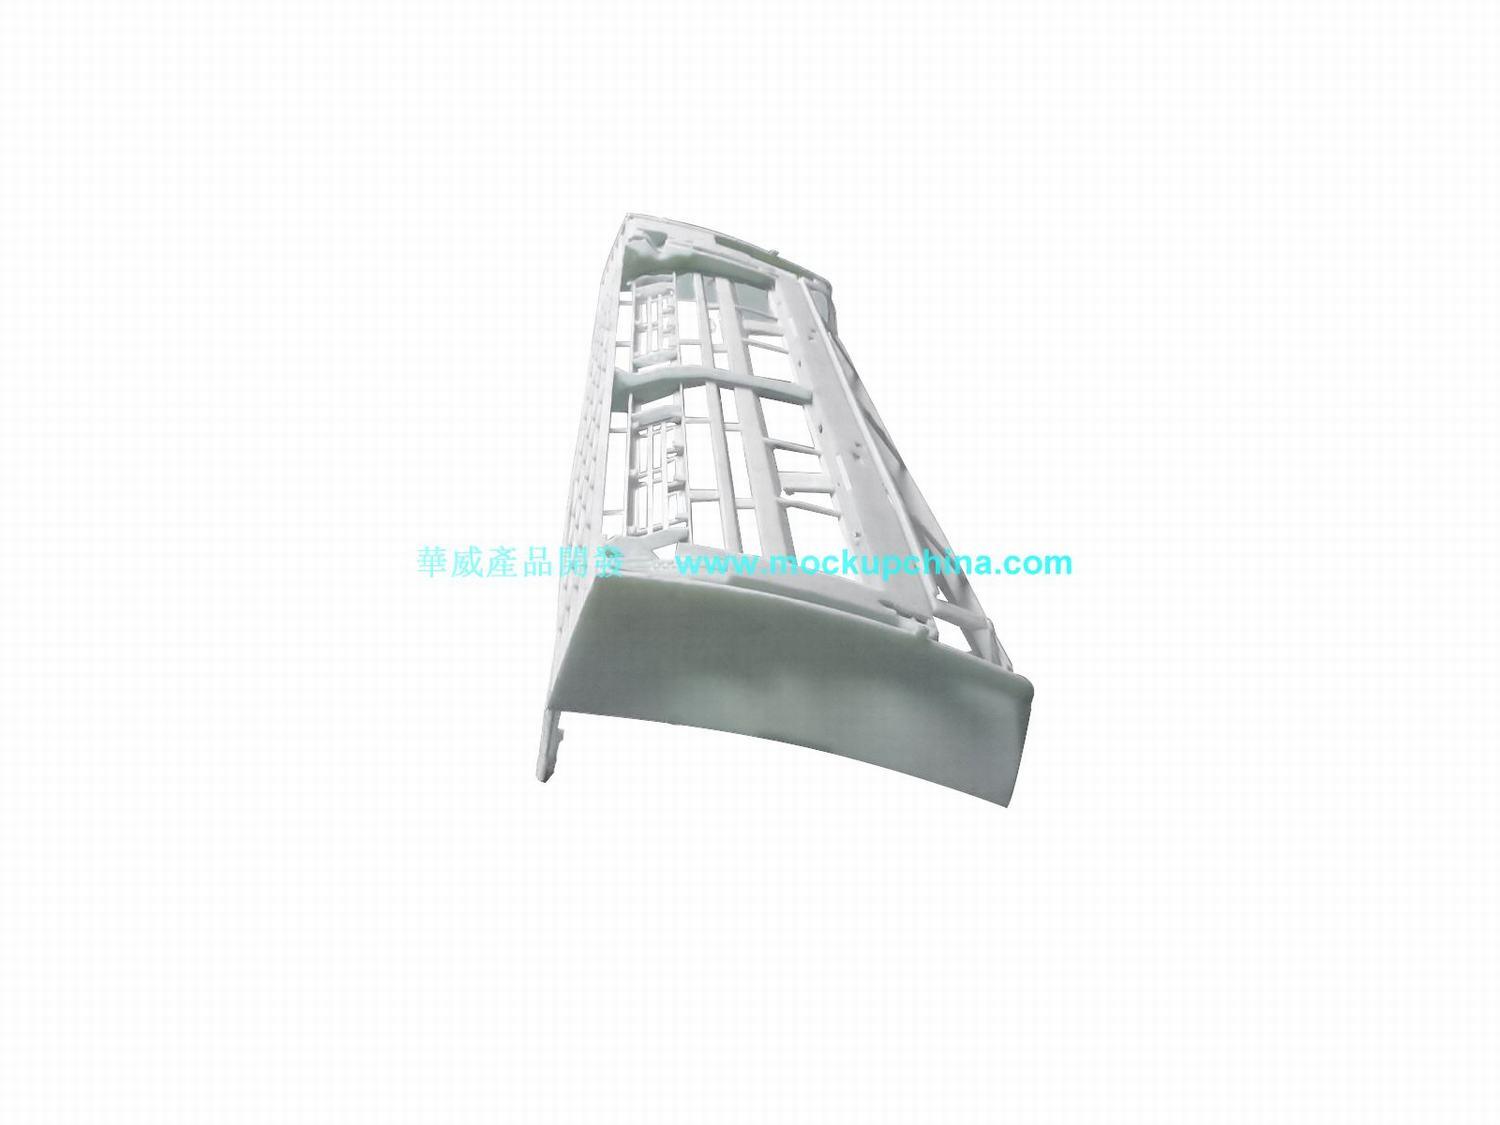 Air Conditioner Cover (010)